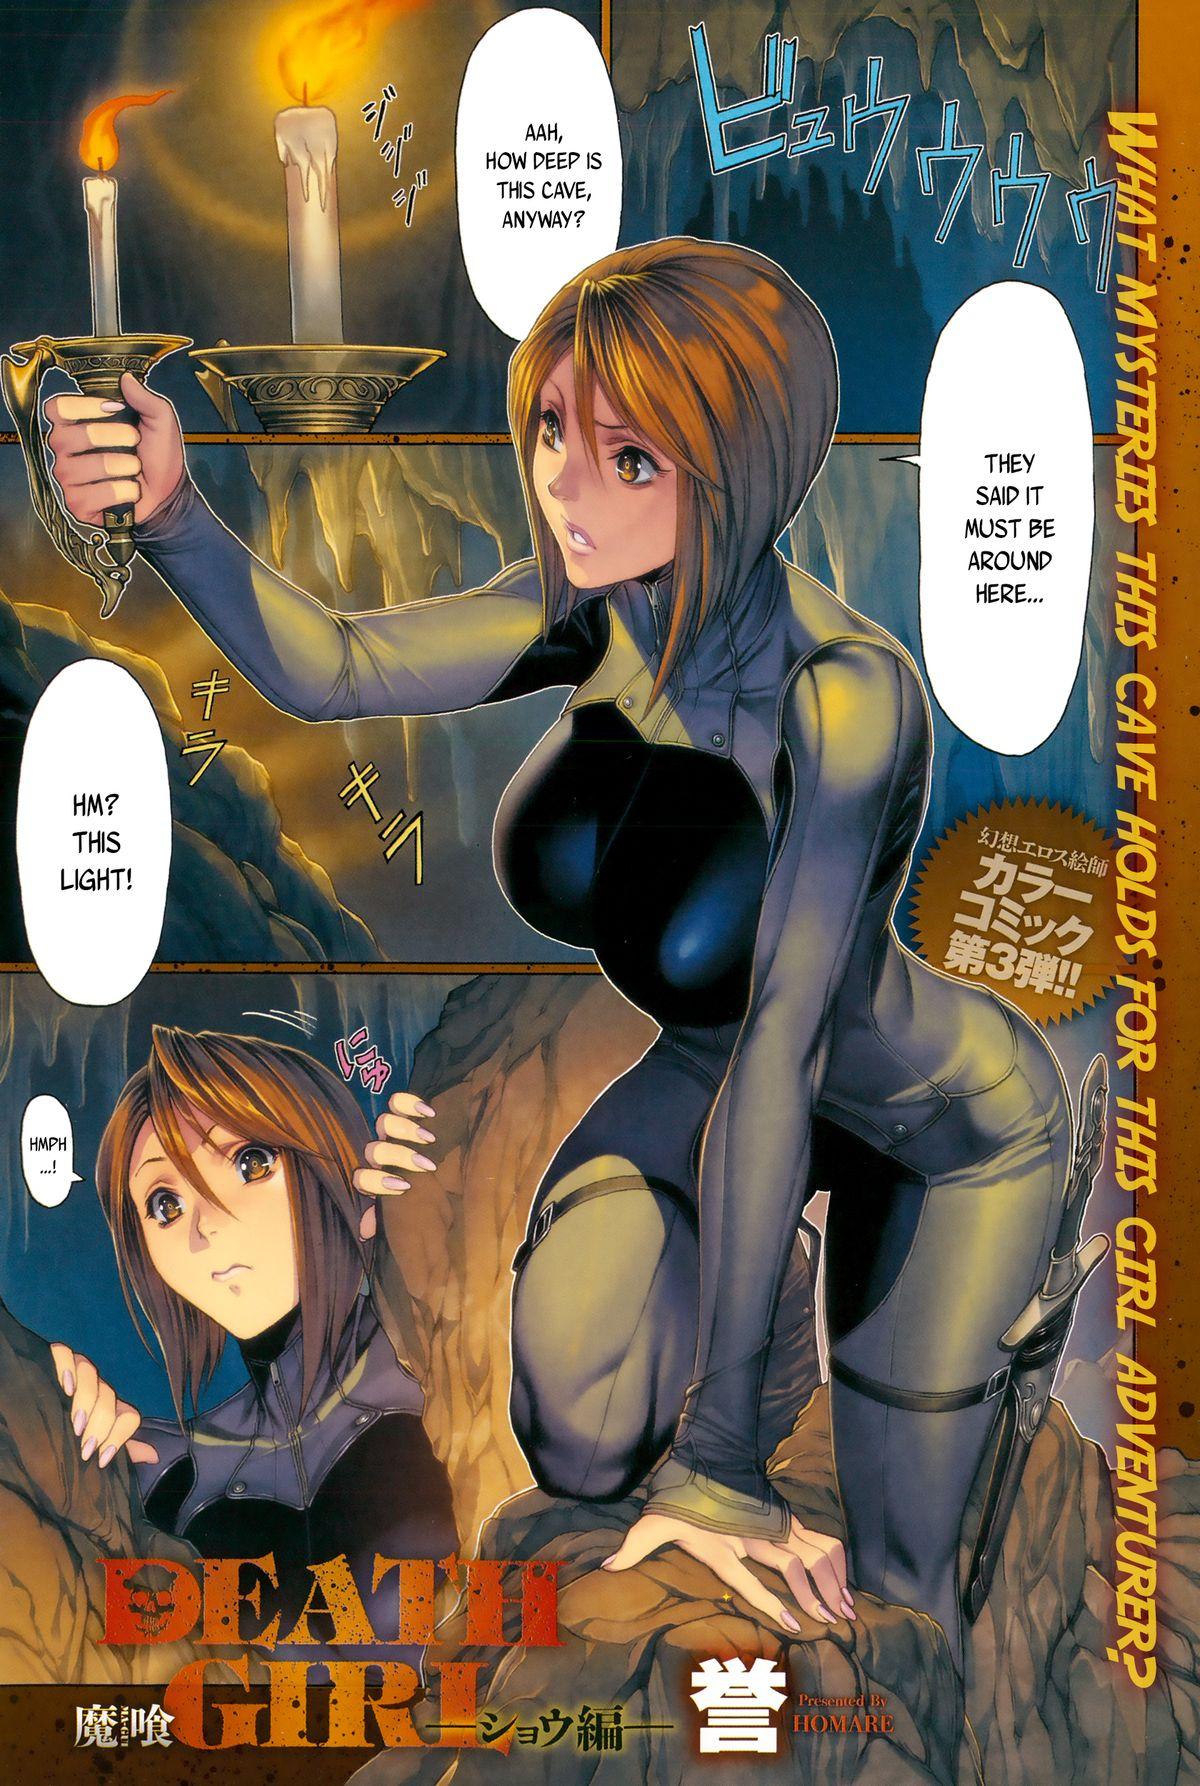 Cumload [Homare] Ma-Gui -DEATH GIRL- Show Hen (COMIC Anthurium 023 2015-03) [English] (Mederic64) Pain - Page 2